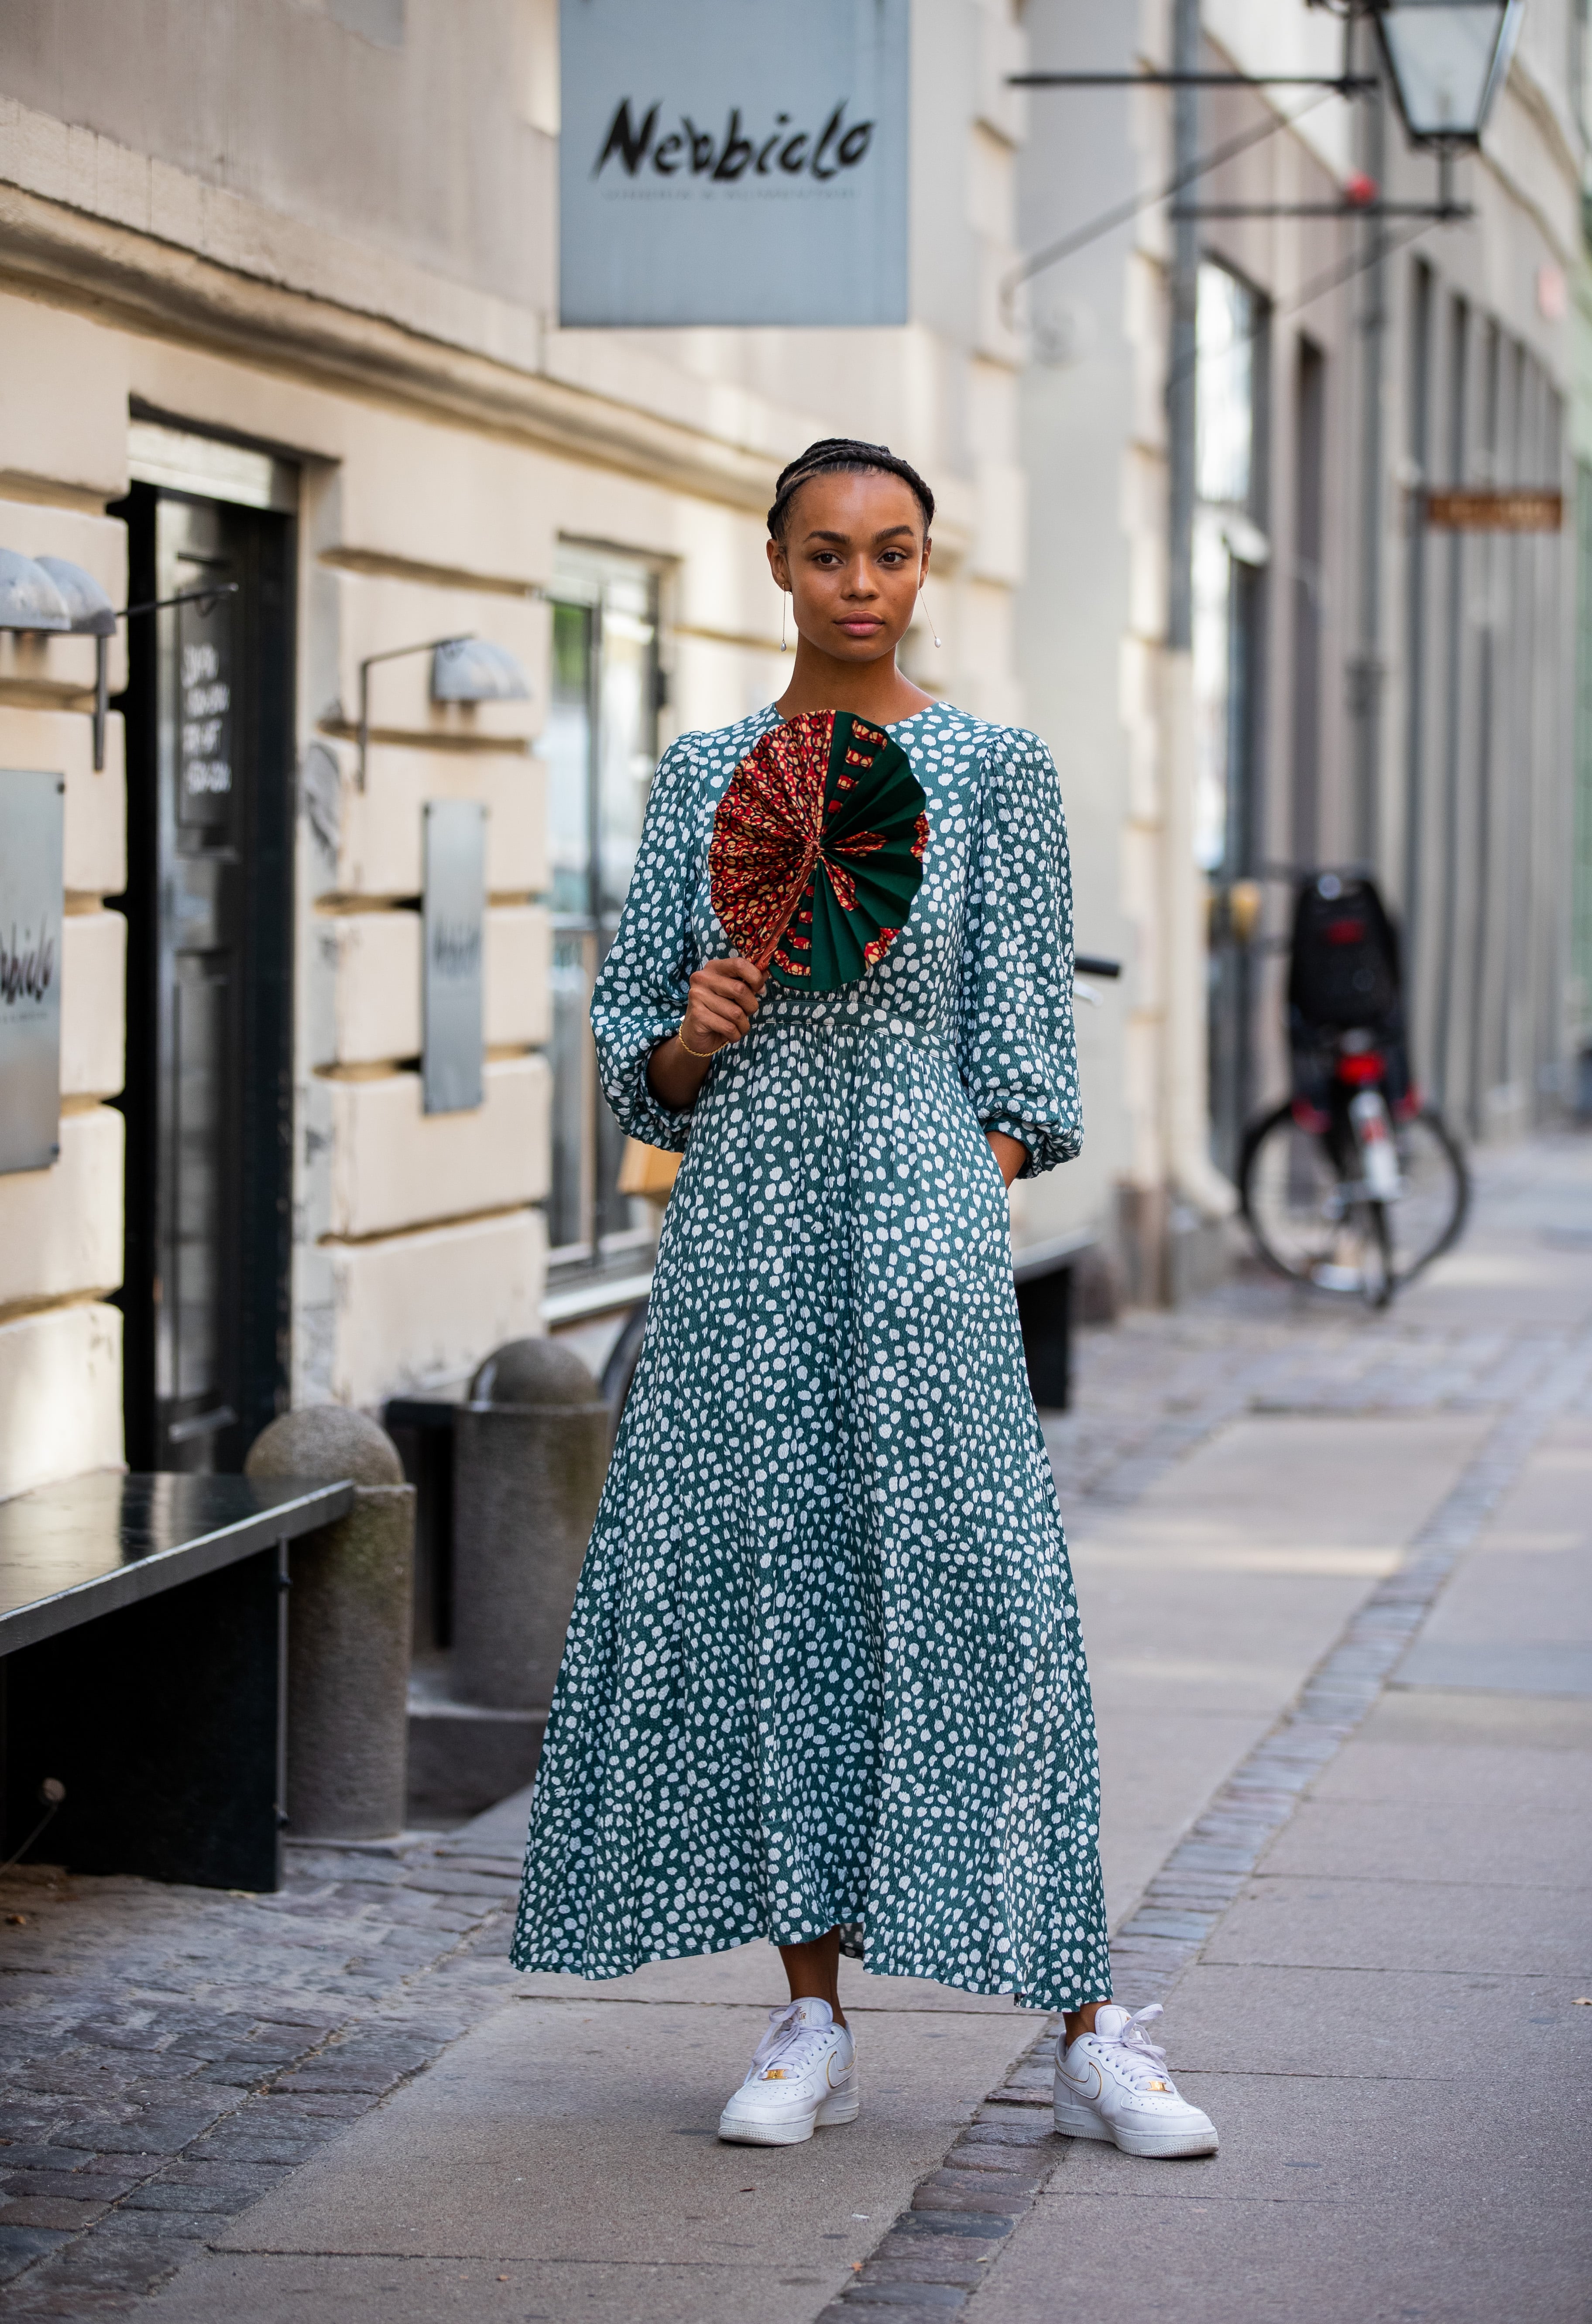 How to Style Gucci Shoes Outfits, According to Fashion Girls